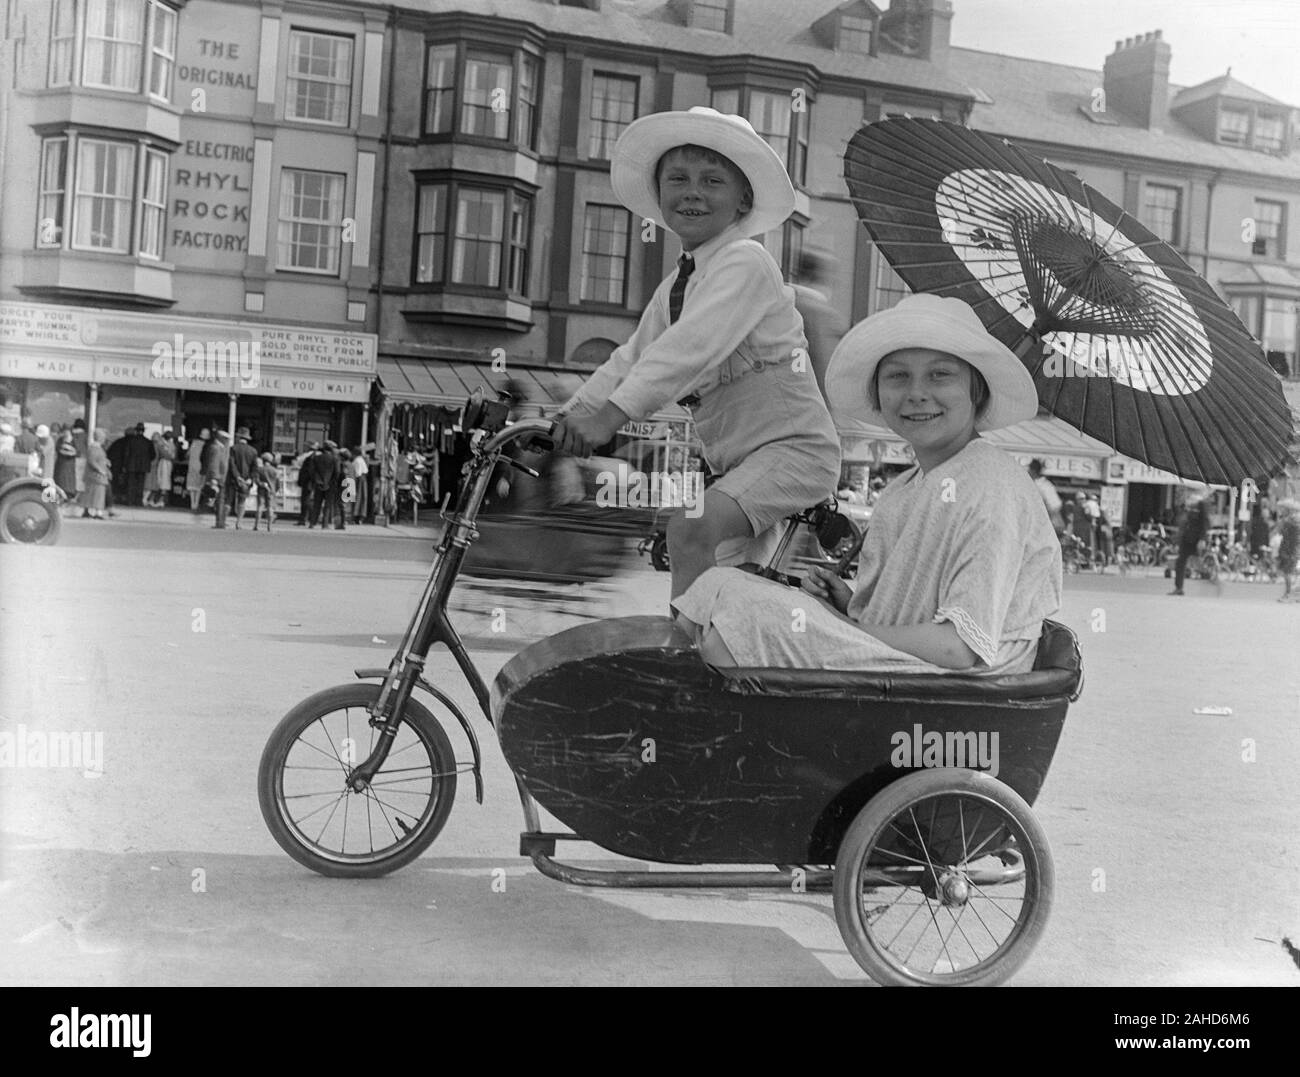 Vintage late Victorian or early Edwardian black and white photograph showing a young boy wearing a large white hat, peddling a bicycle with his sister, holding a parasol or umbrella, sitting in a sidecar attached to the bicycle. Photograph taken in Rhyl, North wales. Stock Photo